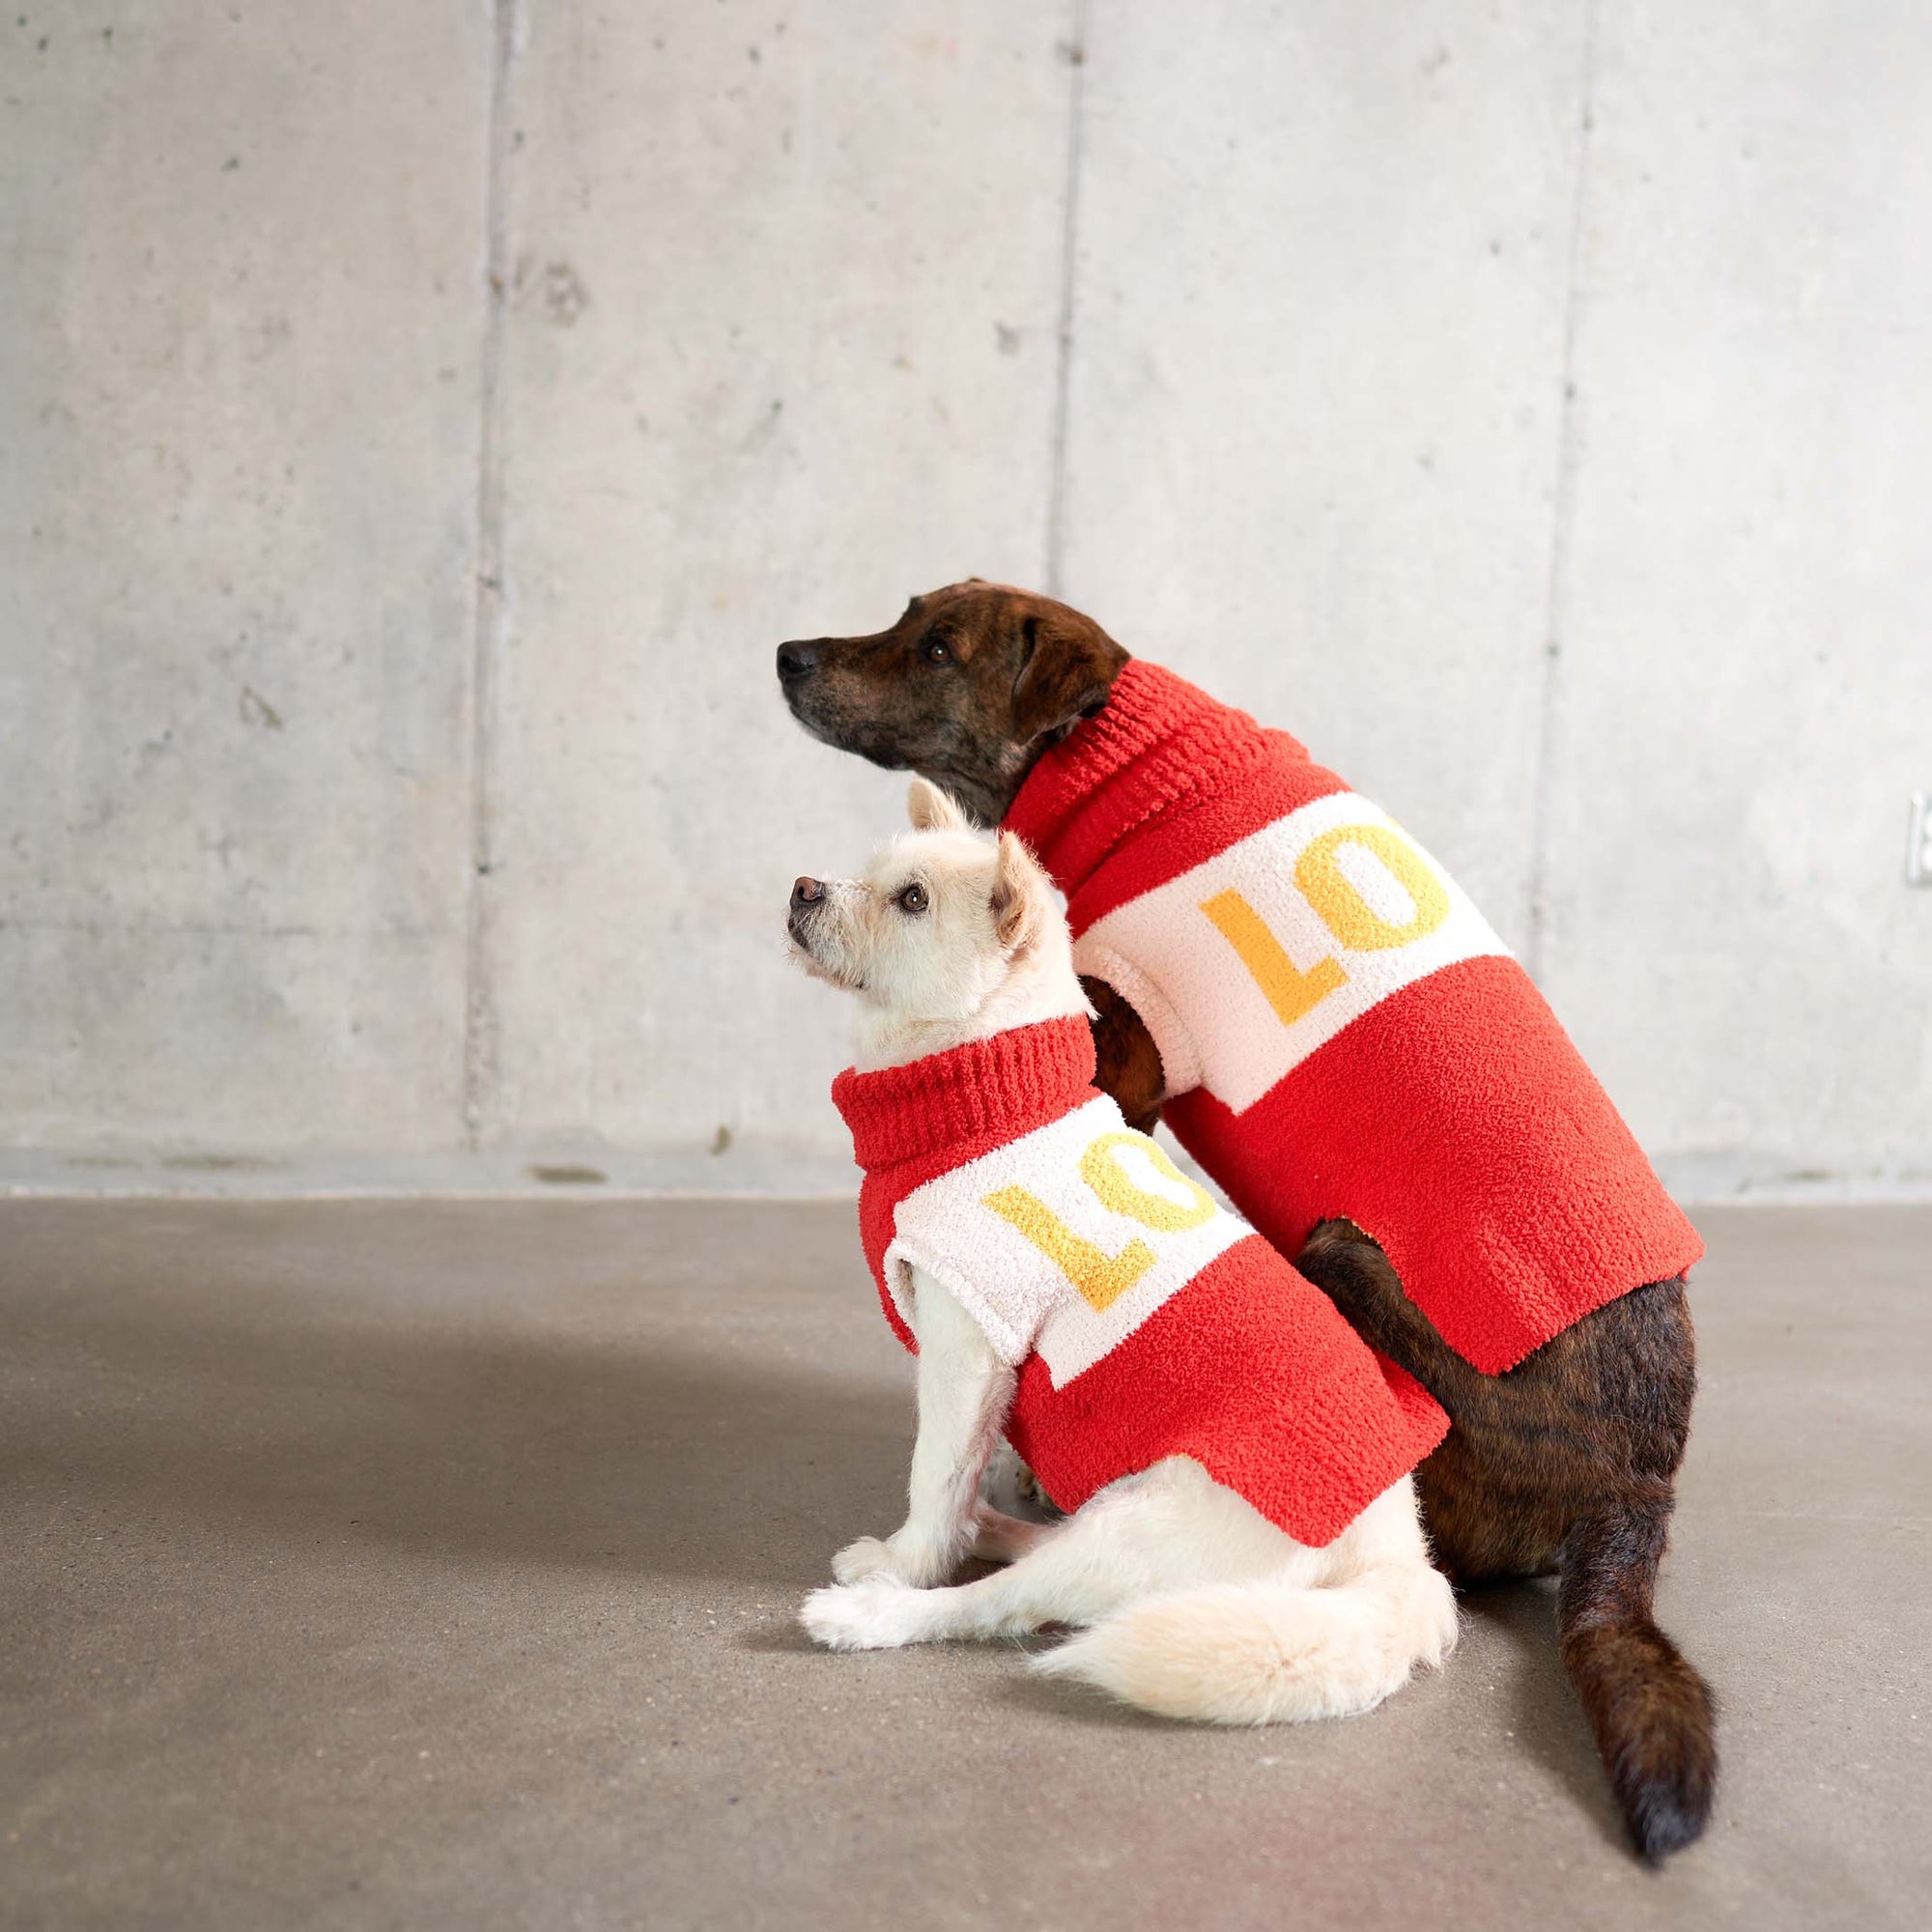 A brindle and a white dog are adorned with bold red sweaters that spell "LOVE," showcasing a delightful display of pet fashion against a minimalist backdrop.